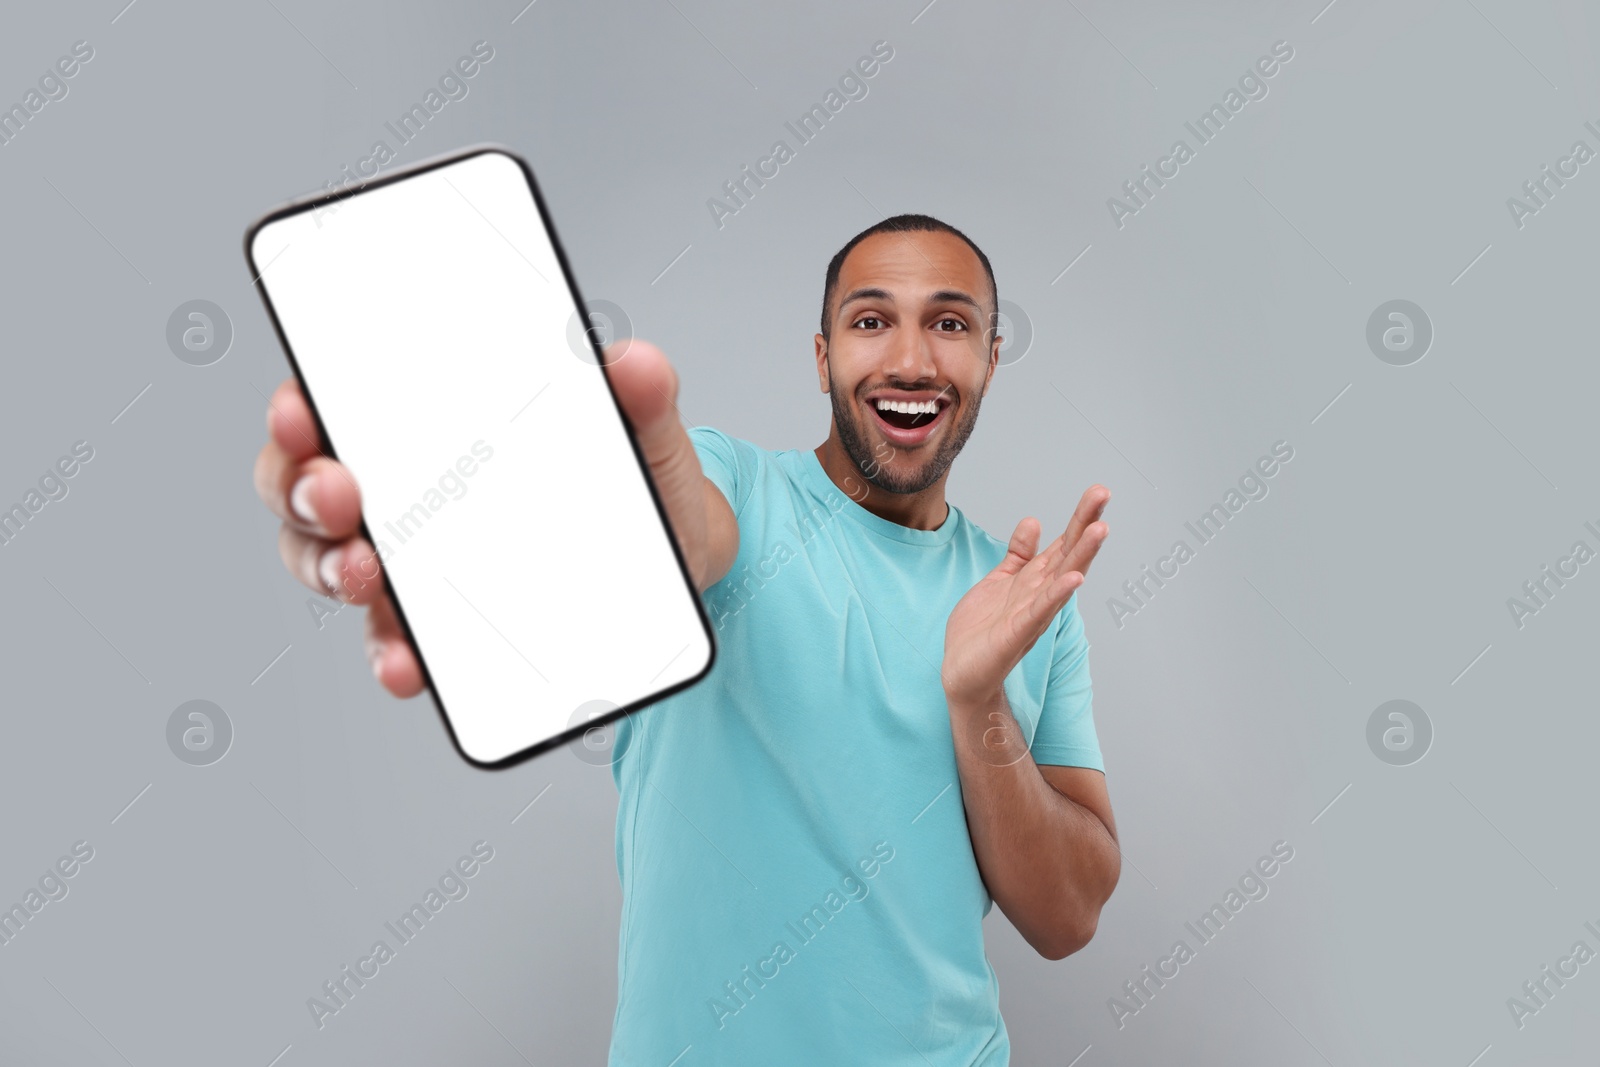 Photo of Surprised man showing smartphone in hand on light grey background